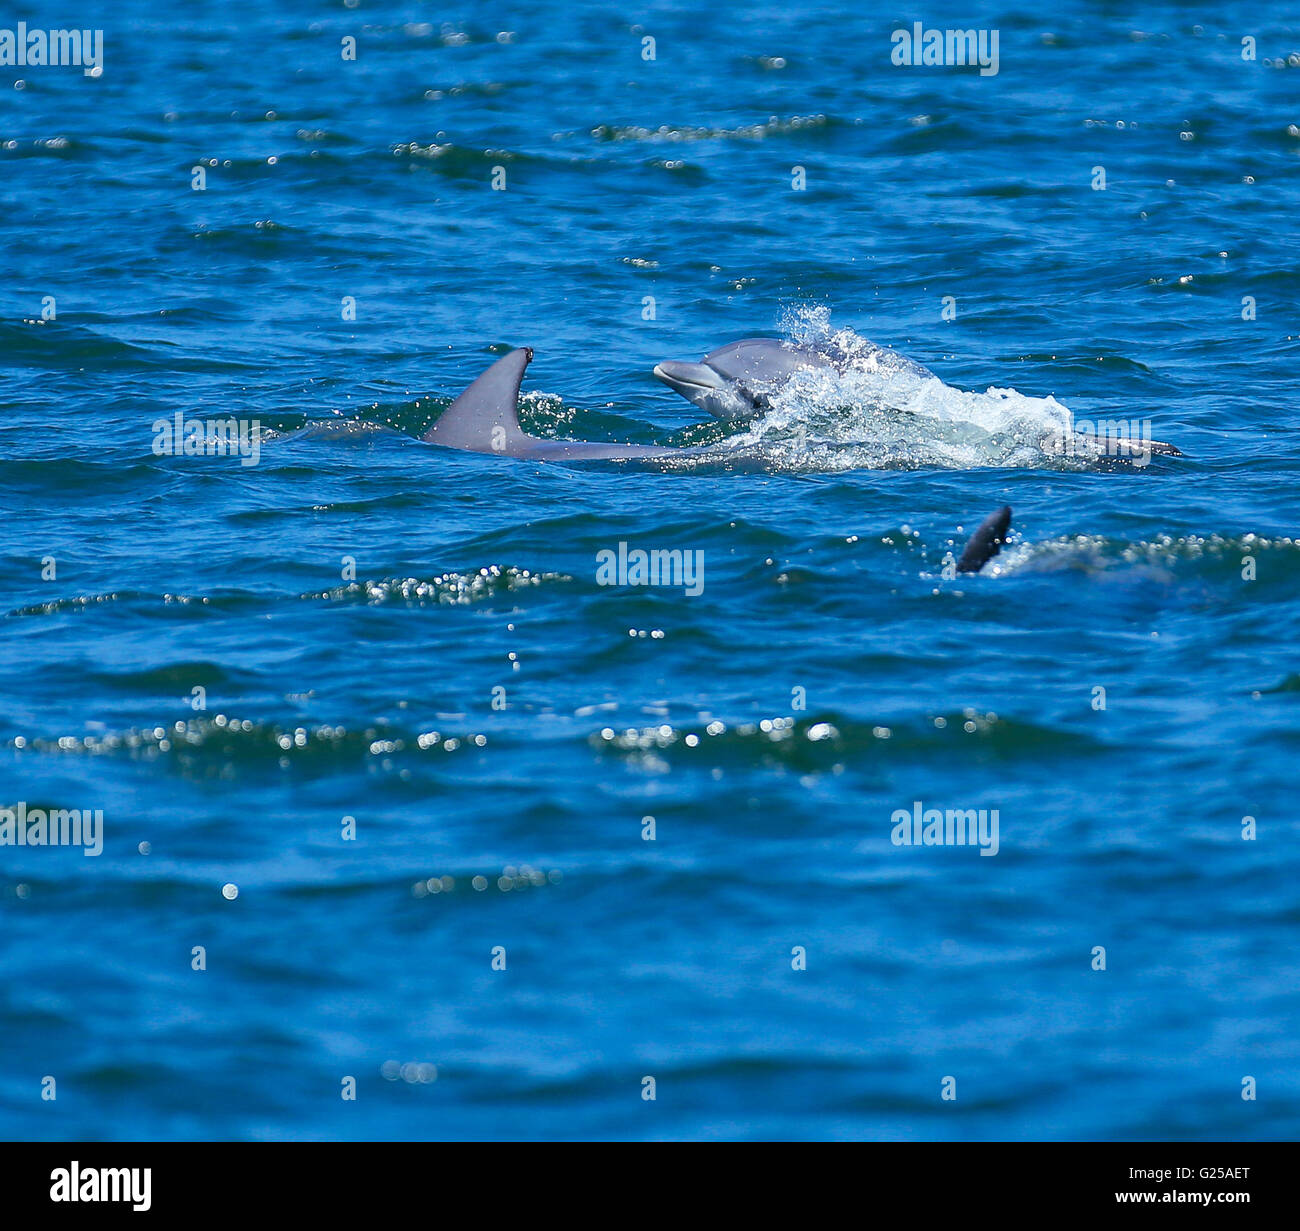 Dolphins swimming in sea, Port Stephens, New South Wales, Australia Stock Photo